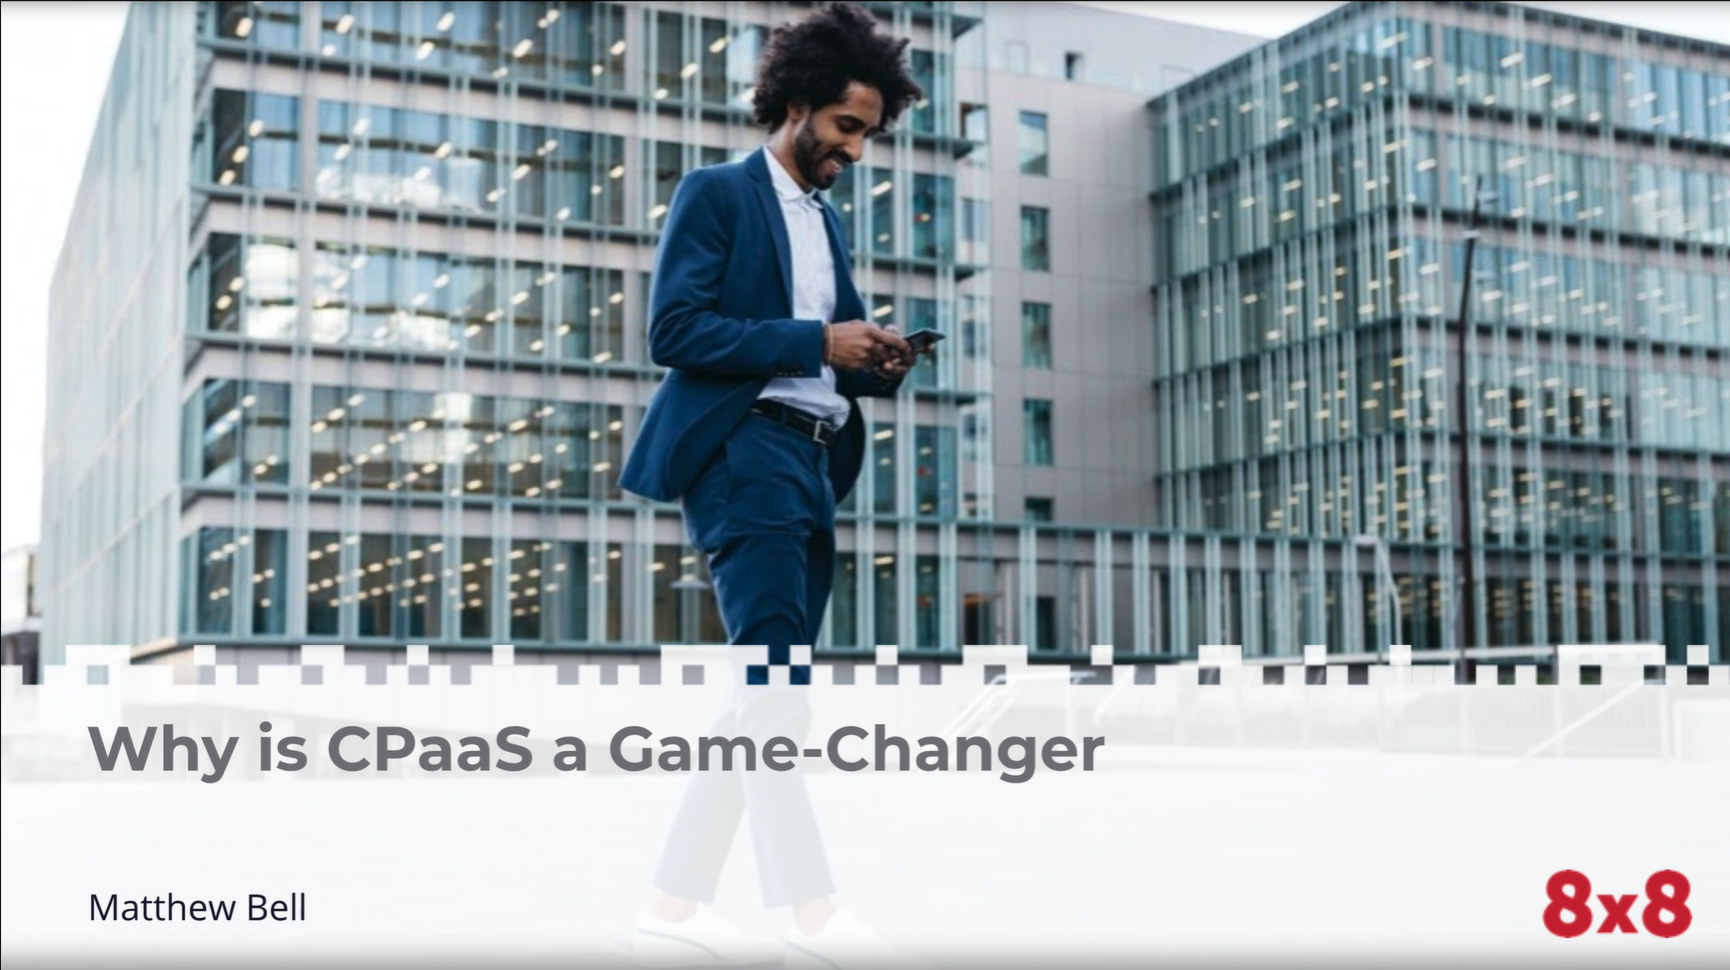 Why is CPaaS a Game-Changer?